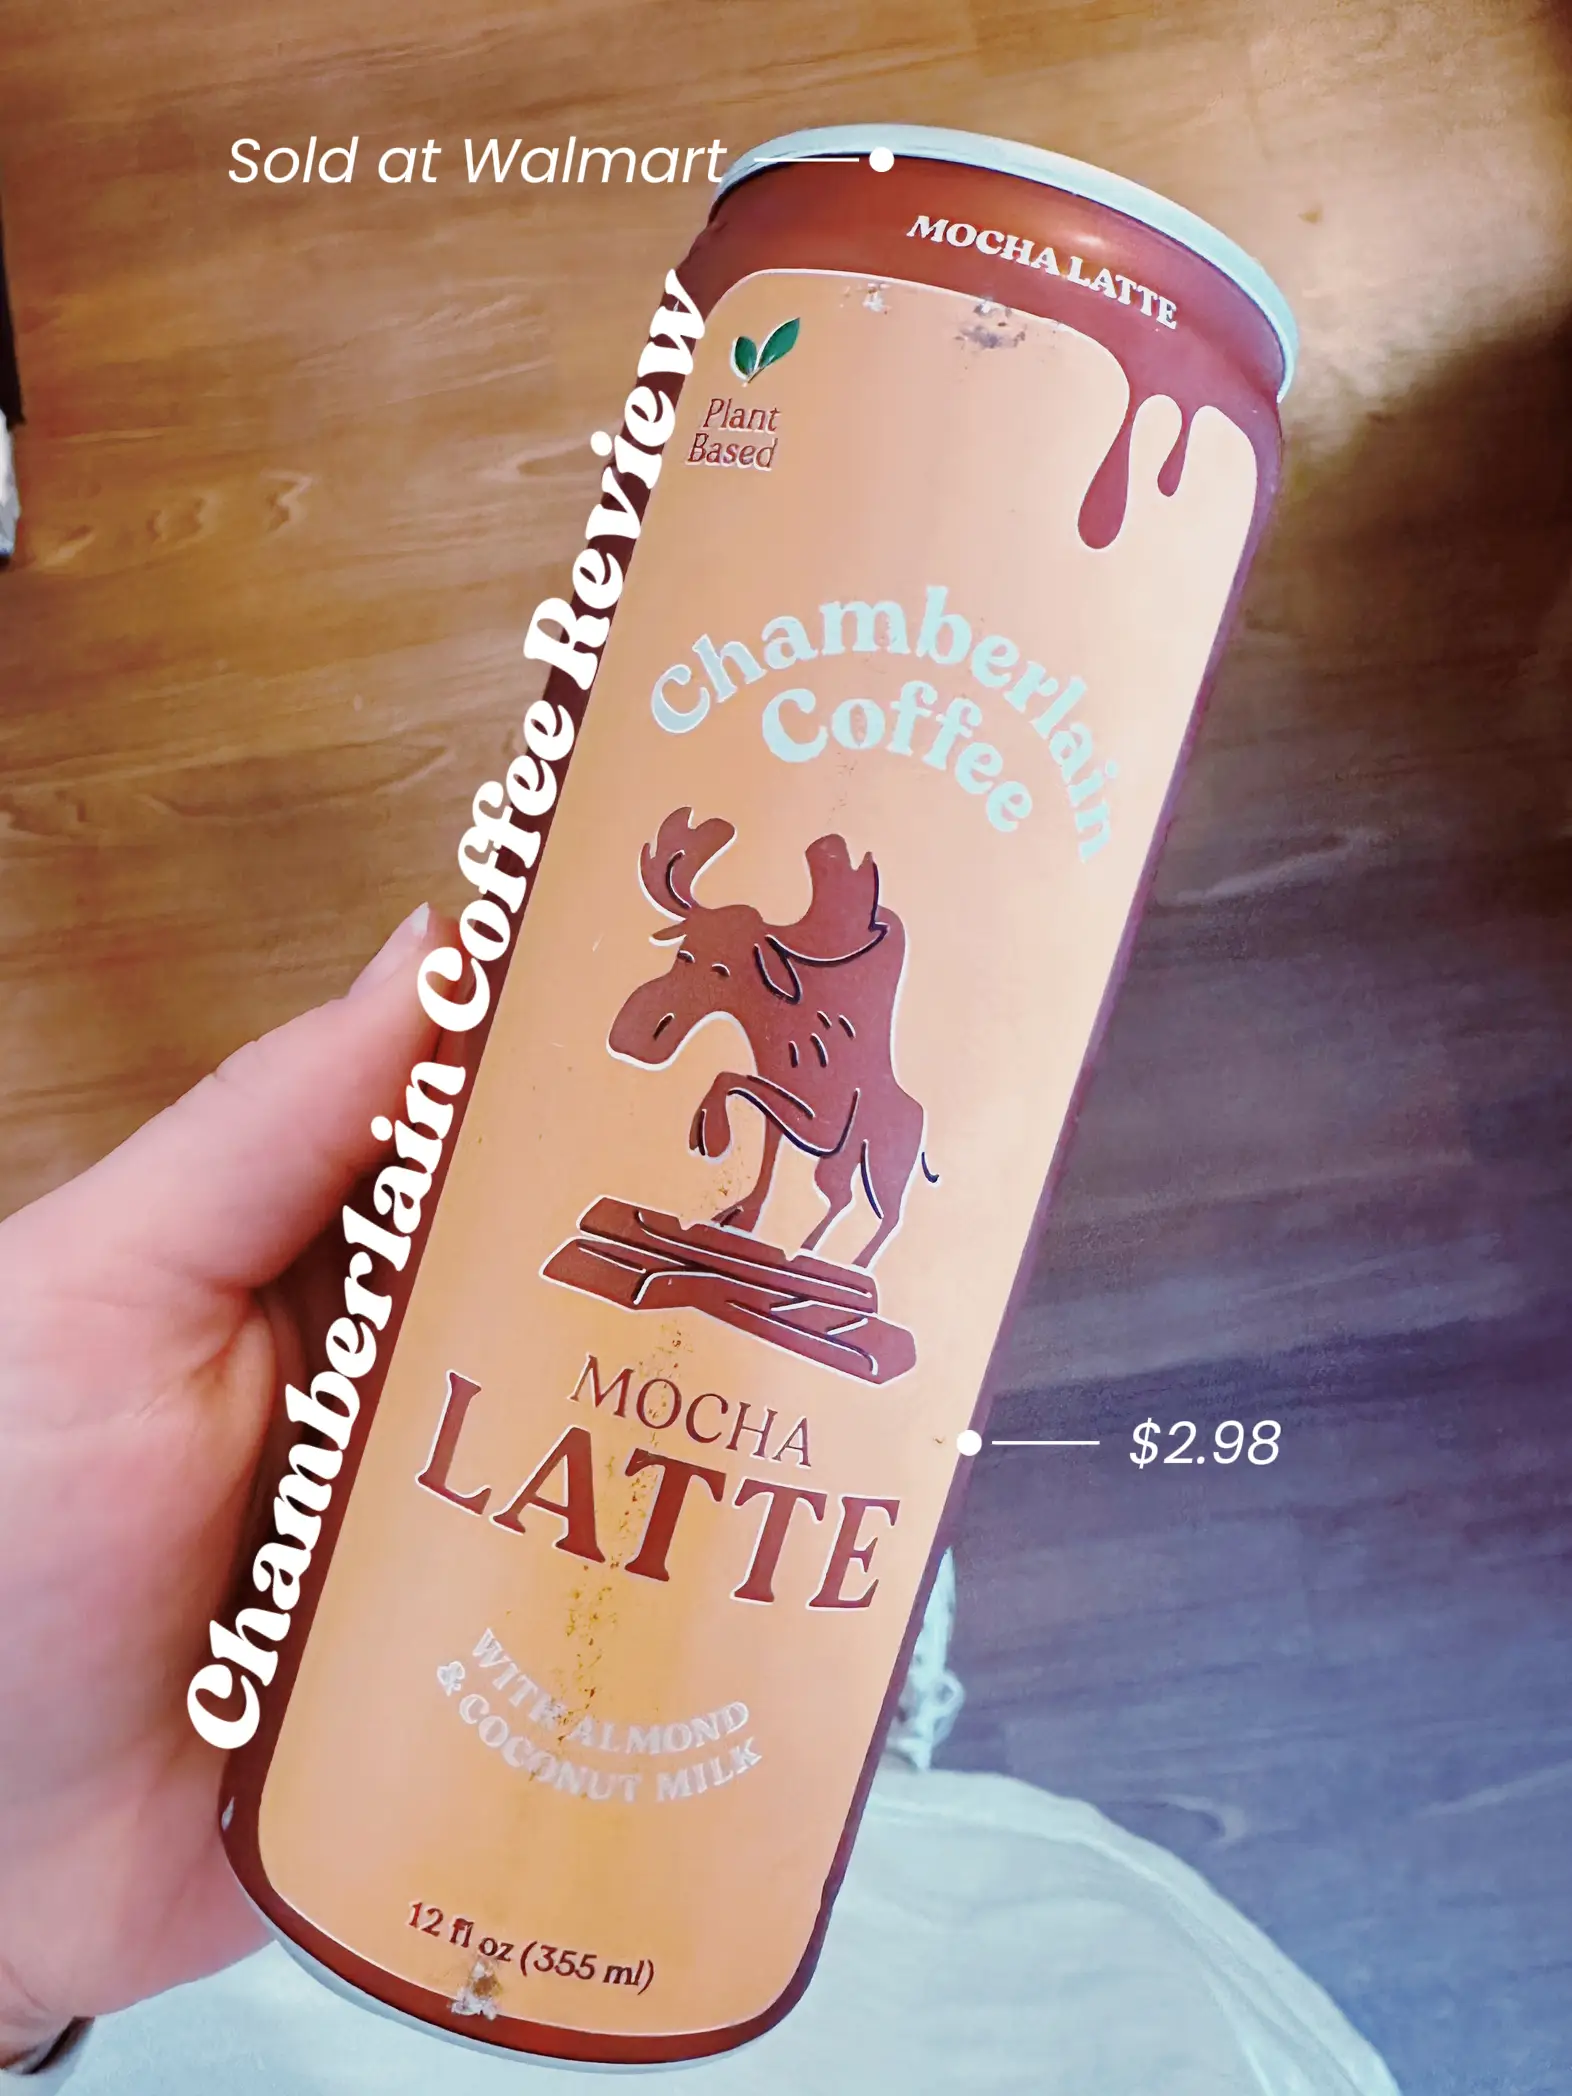 We Tried Emma Chamberlain's Coffee Line and It Wasn't Worth the Work